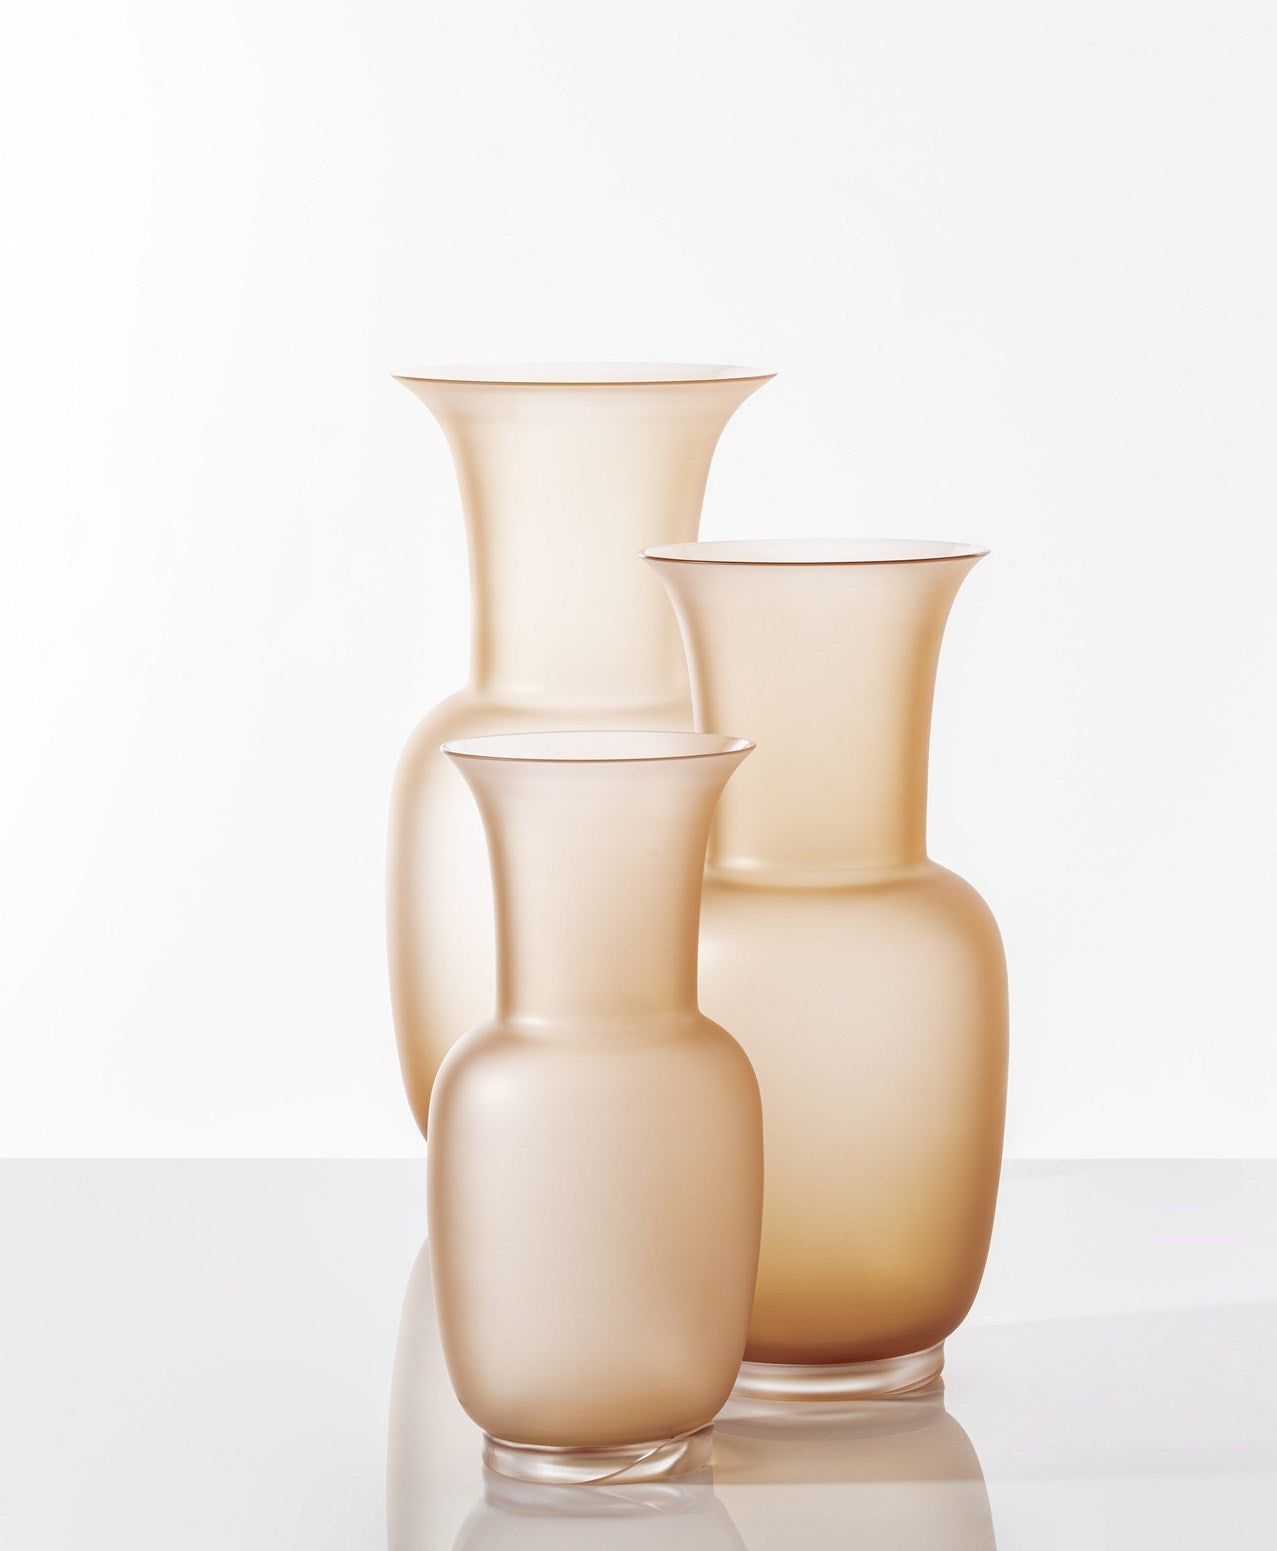 Opalino Vase by Venini | Handmade blown glass vase embodying elegance with pure, essential lines | Made of Murano glass | Available in matte or glossy, opale or transparent finishes | Home Decor Vases | 2Jour Concierge, your luxury lifestyle shop